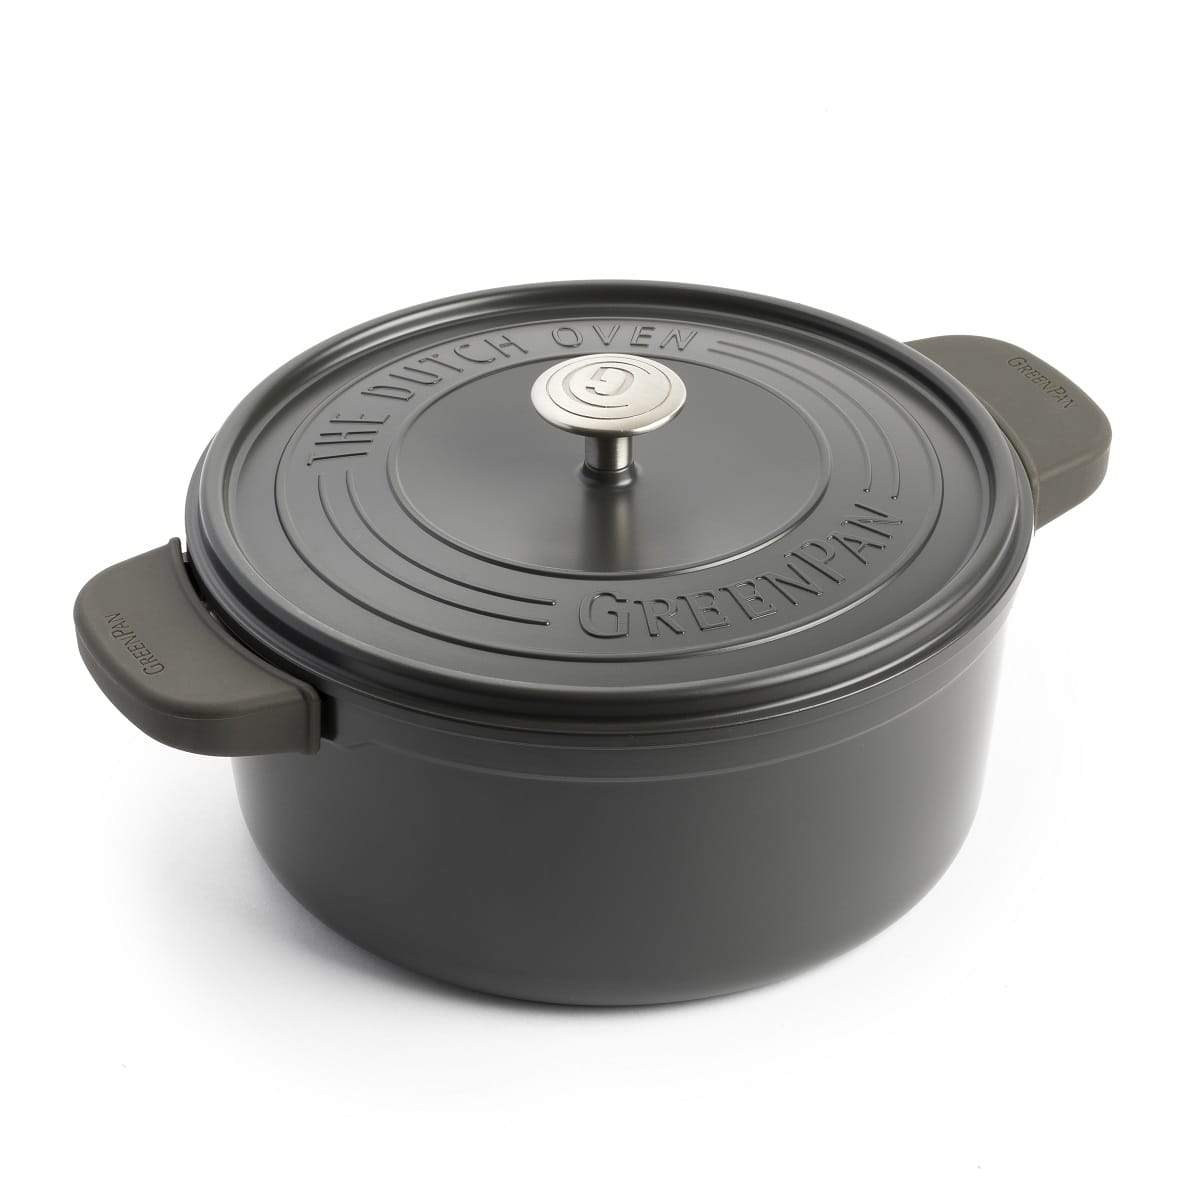 Greenpan Featherweights 28cm Casserole with Lid-Browny Black 2